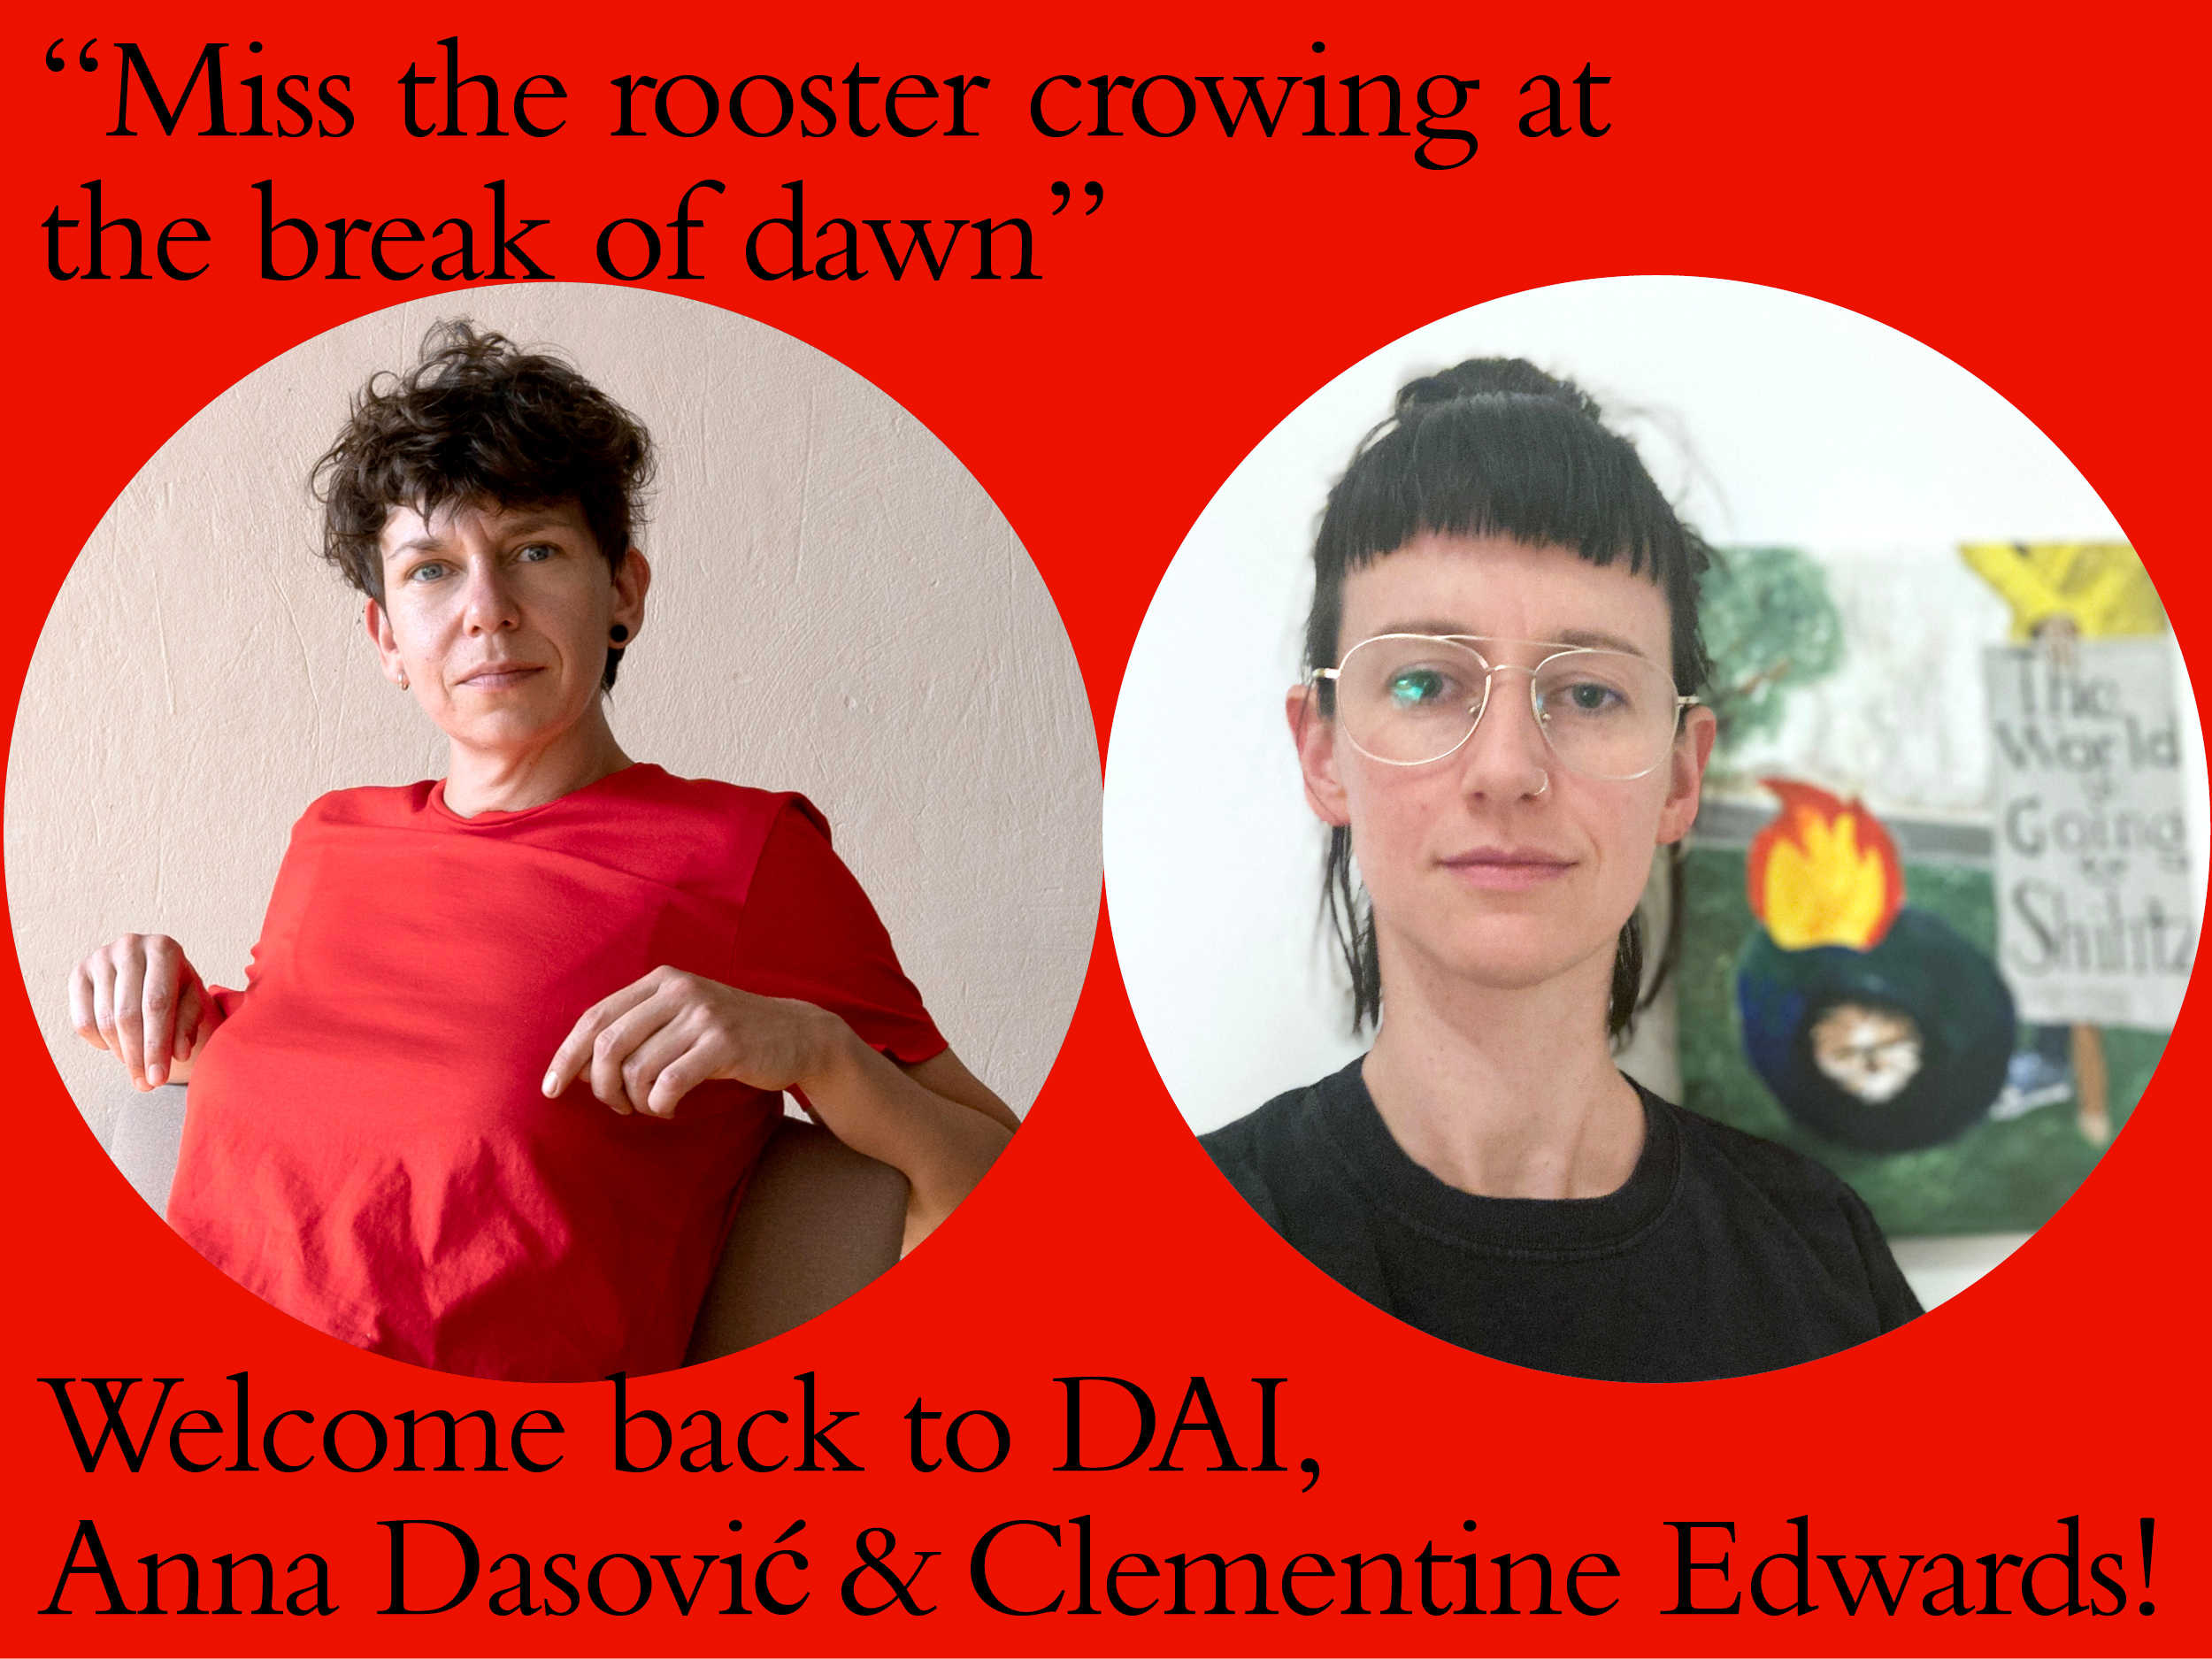 DAI welcomes back Anna Dasović & Clementine Edwards - member of our alumni embassy for Kitchen, 26th June.